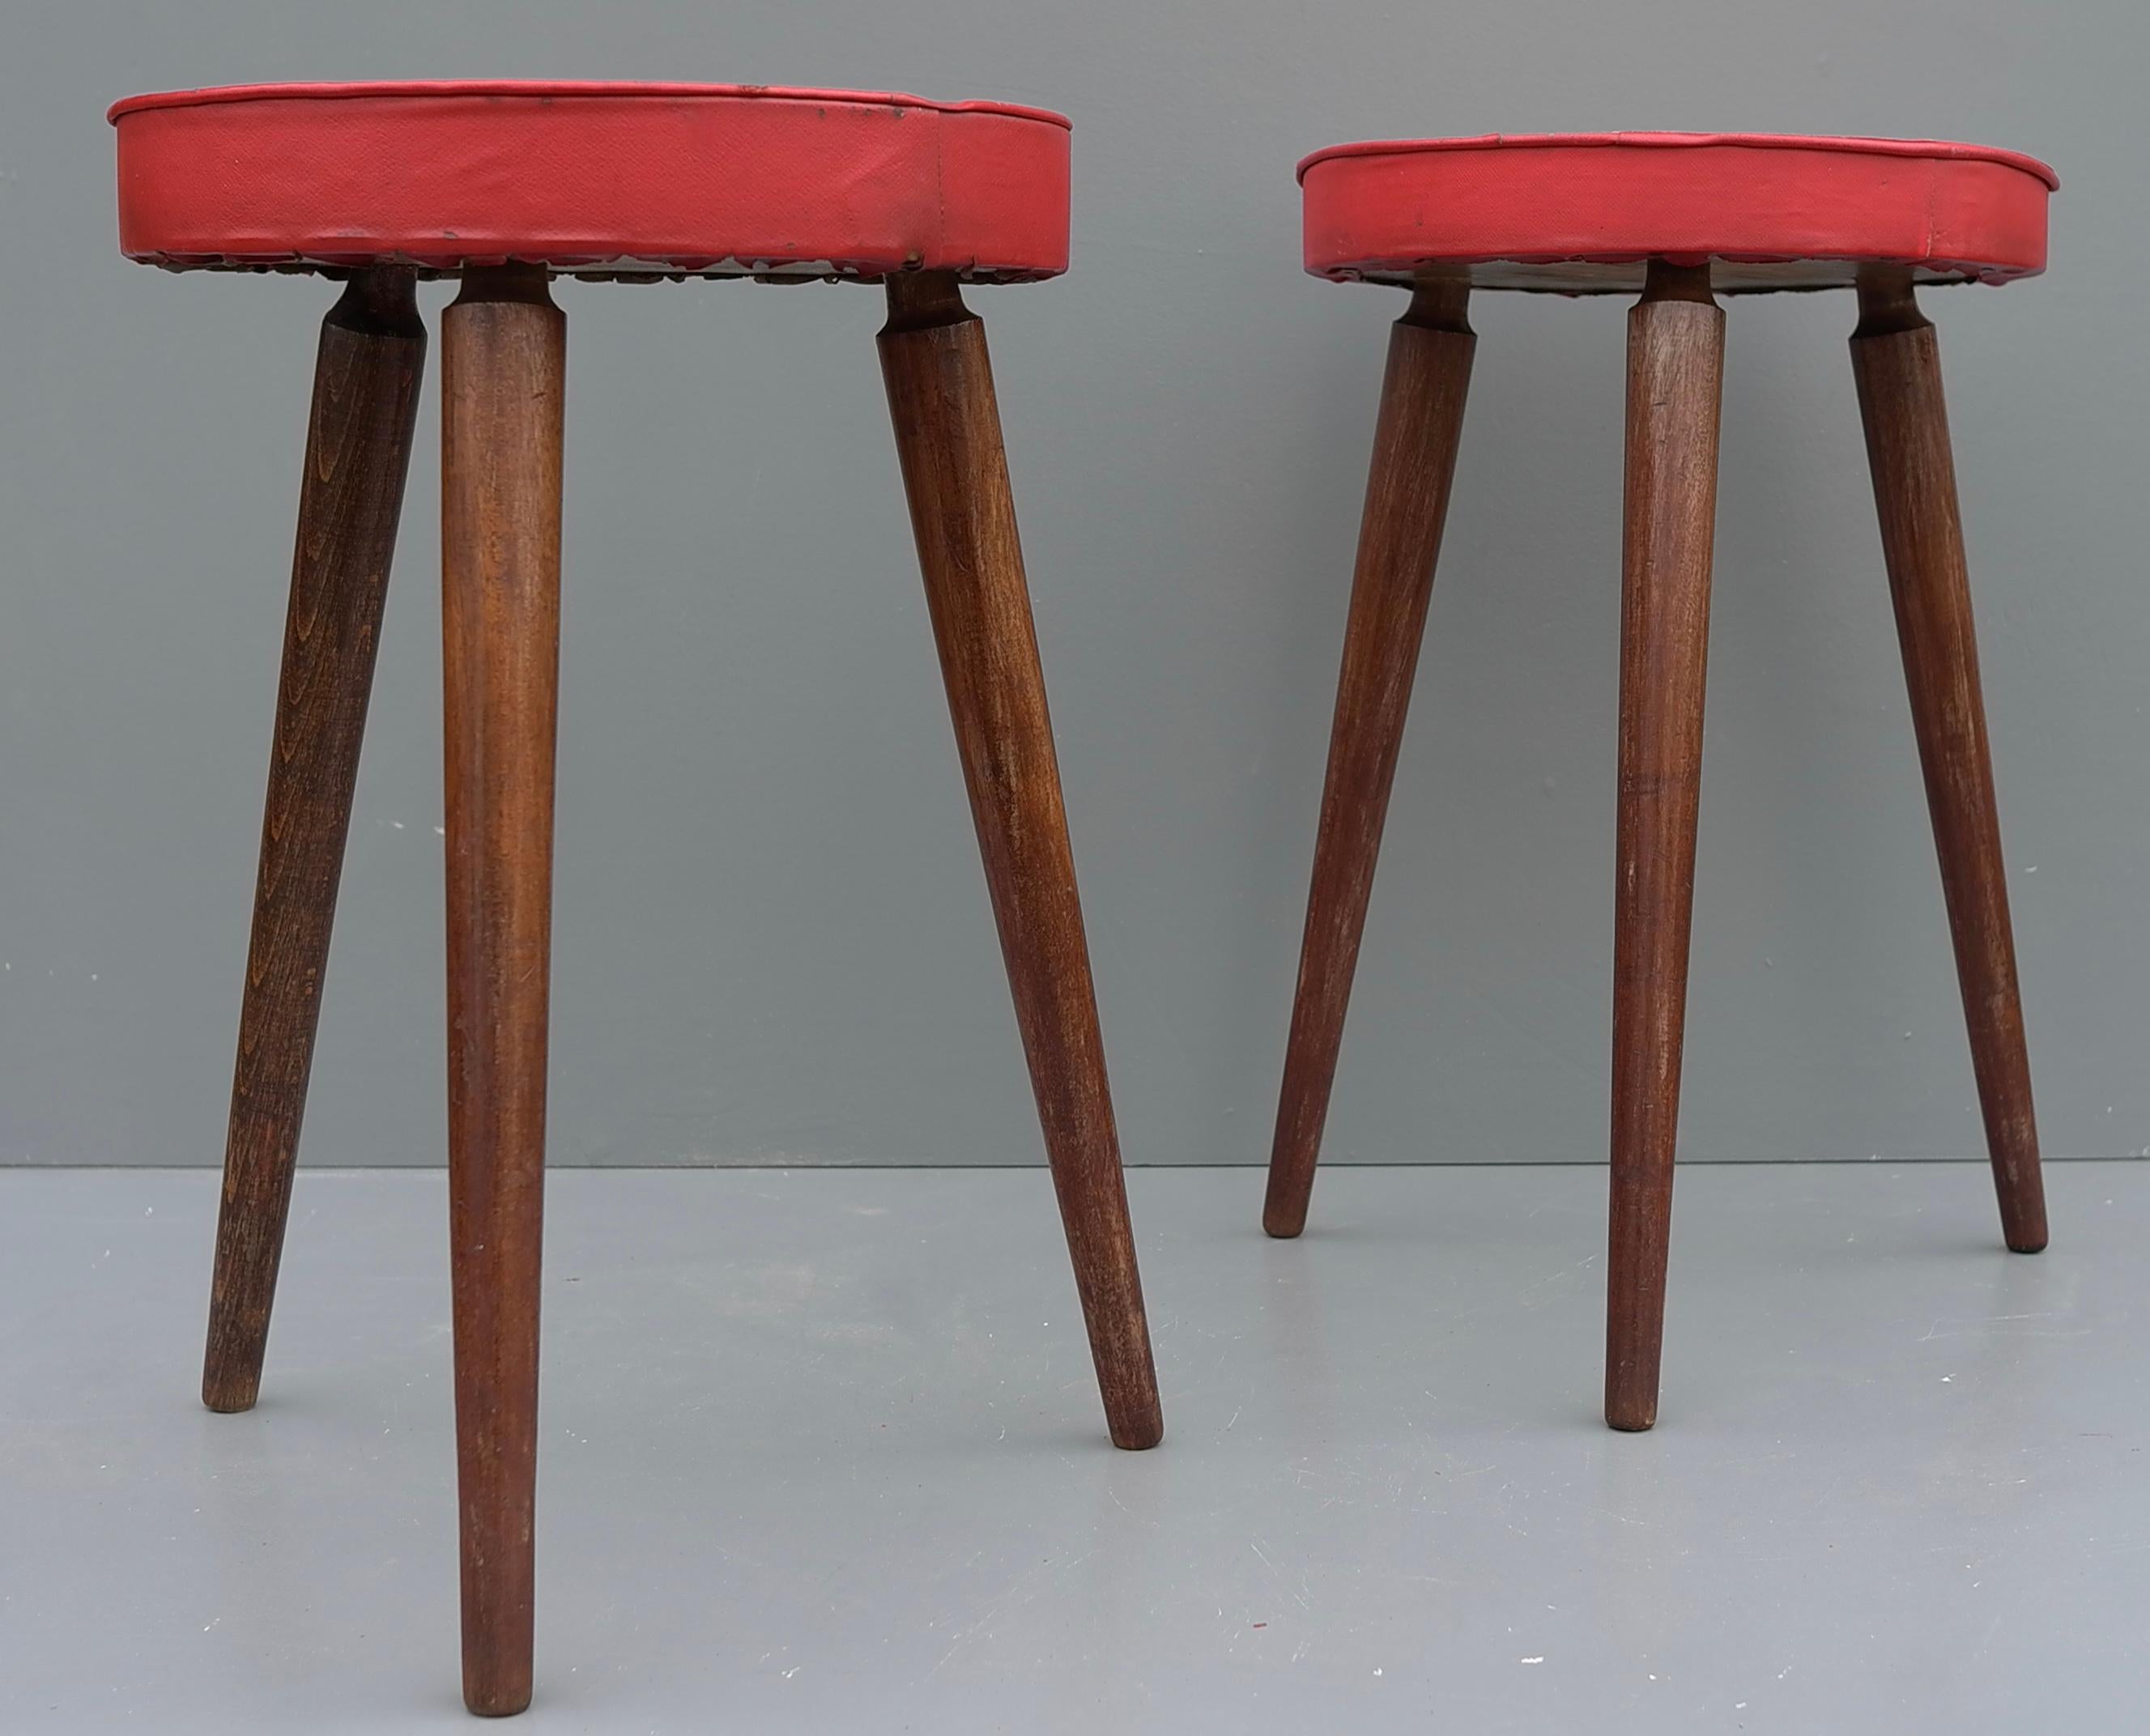 Pair of oak stools with red vinyl seats, France, 1960's.